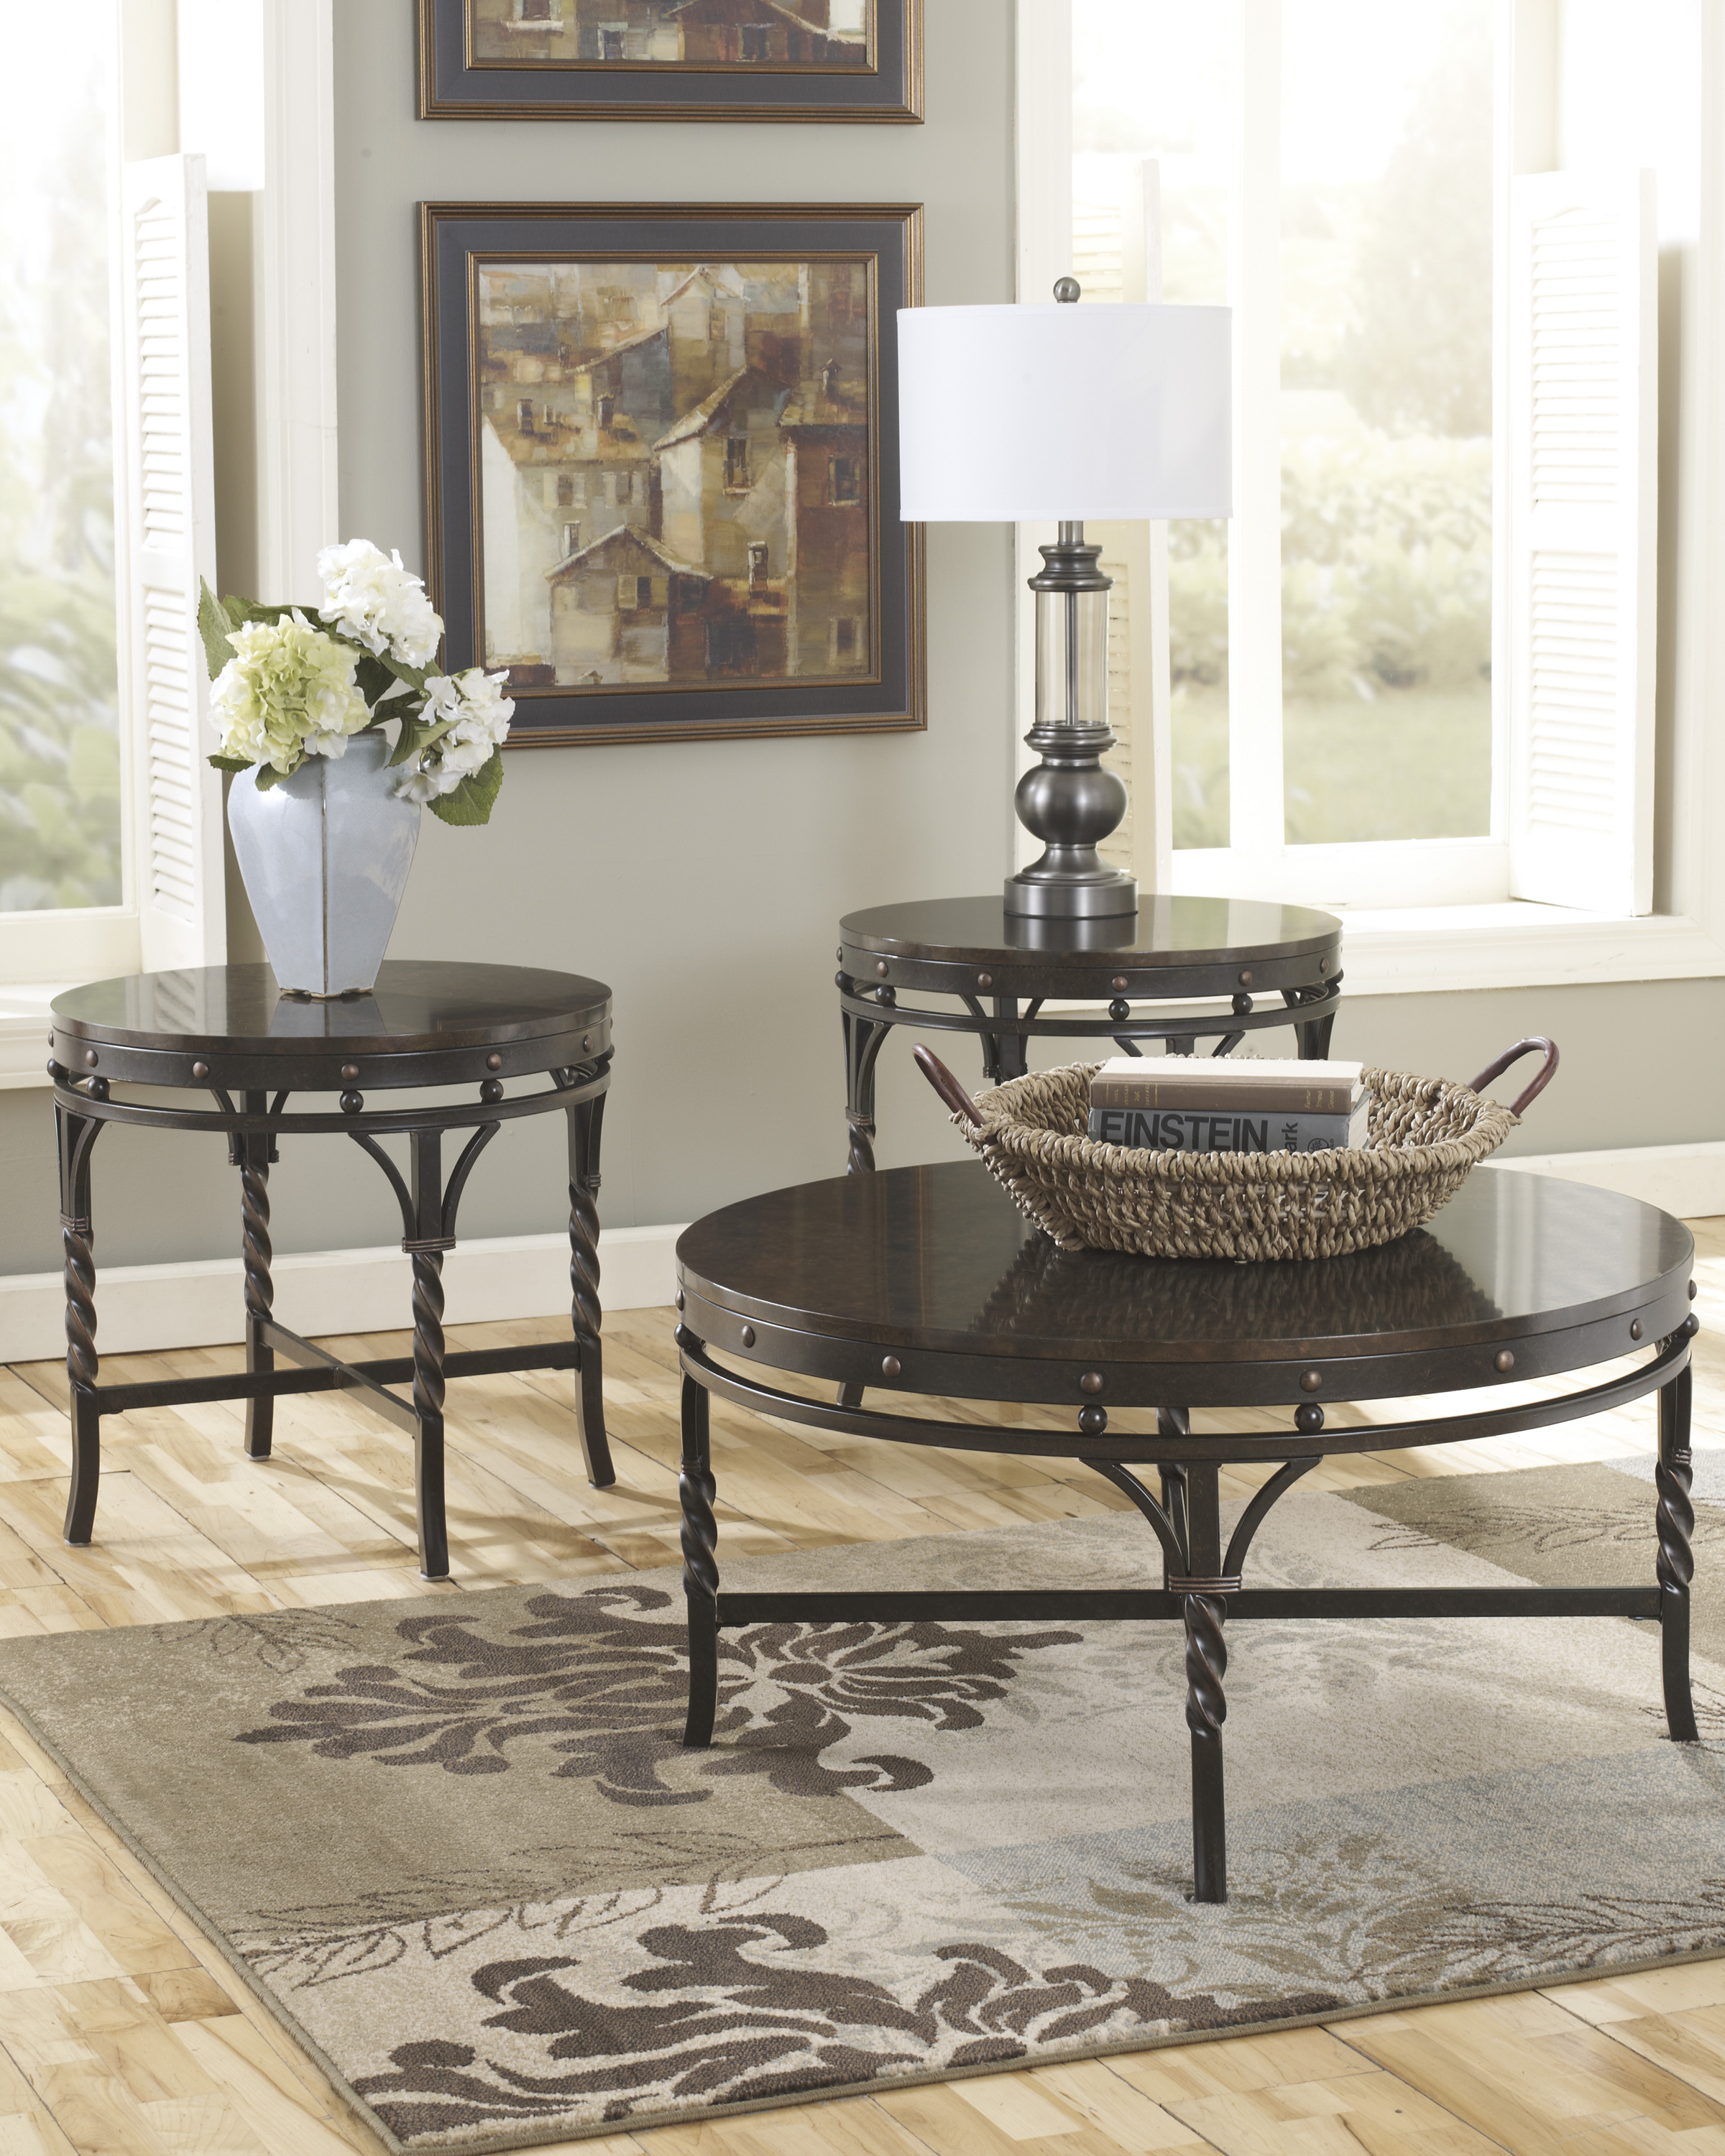 brindleton table set brown furniture showplace accent with nailheads lightbox antique round claw feet entrance ideas patio dining bench island county inch wall clock ashley end